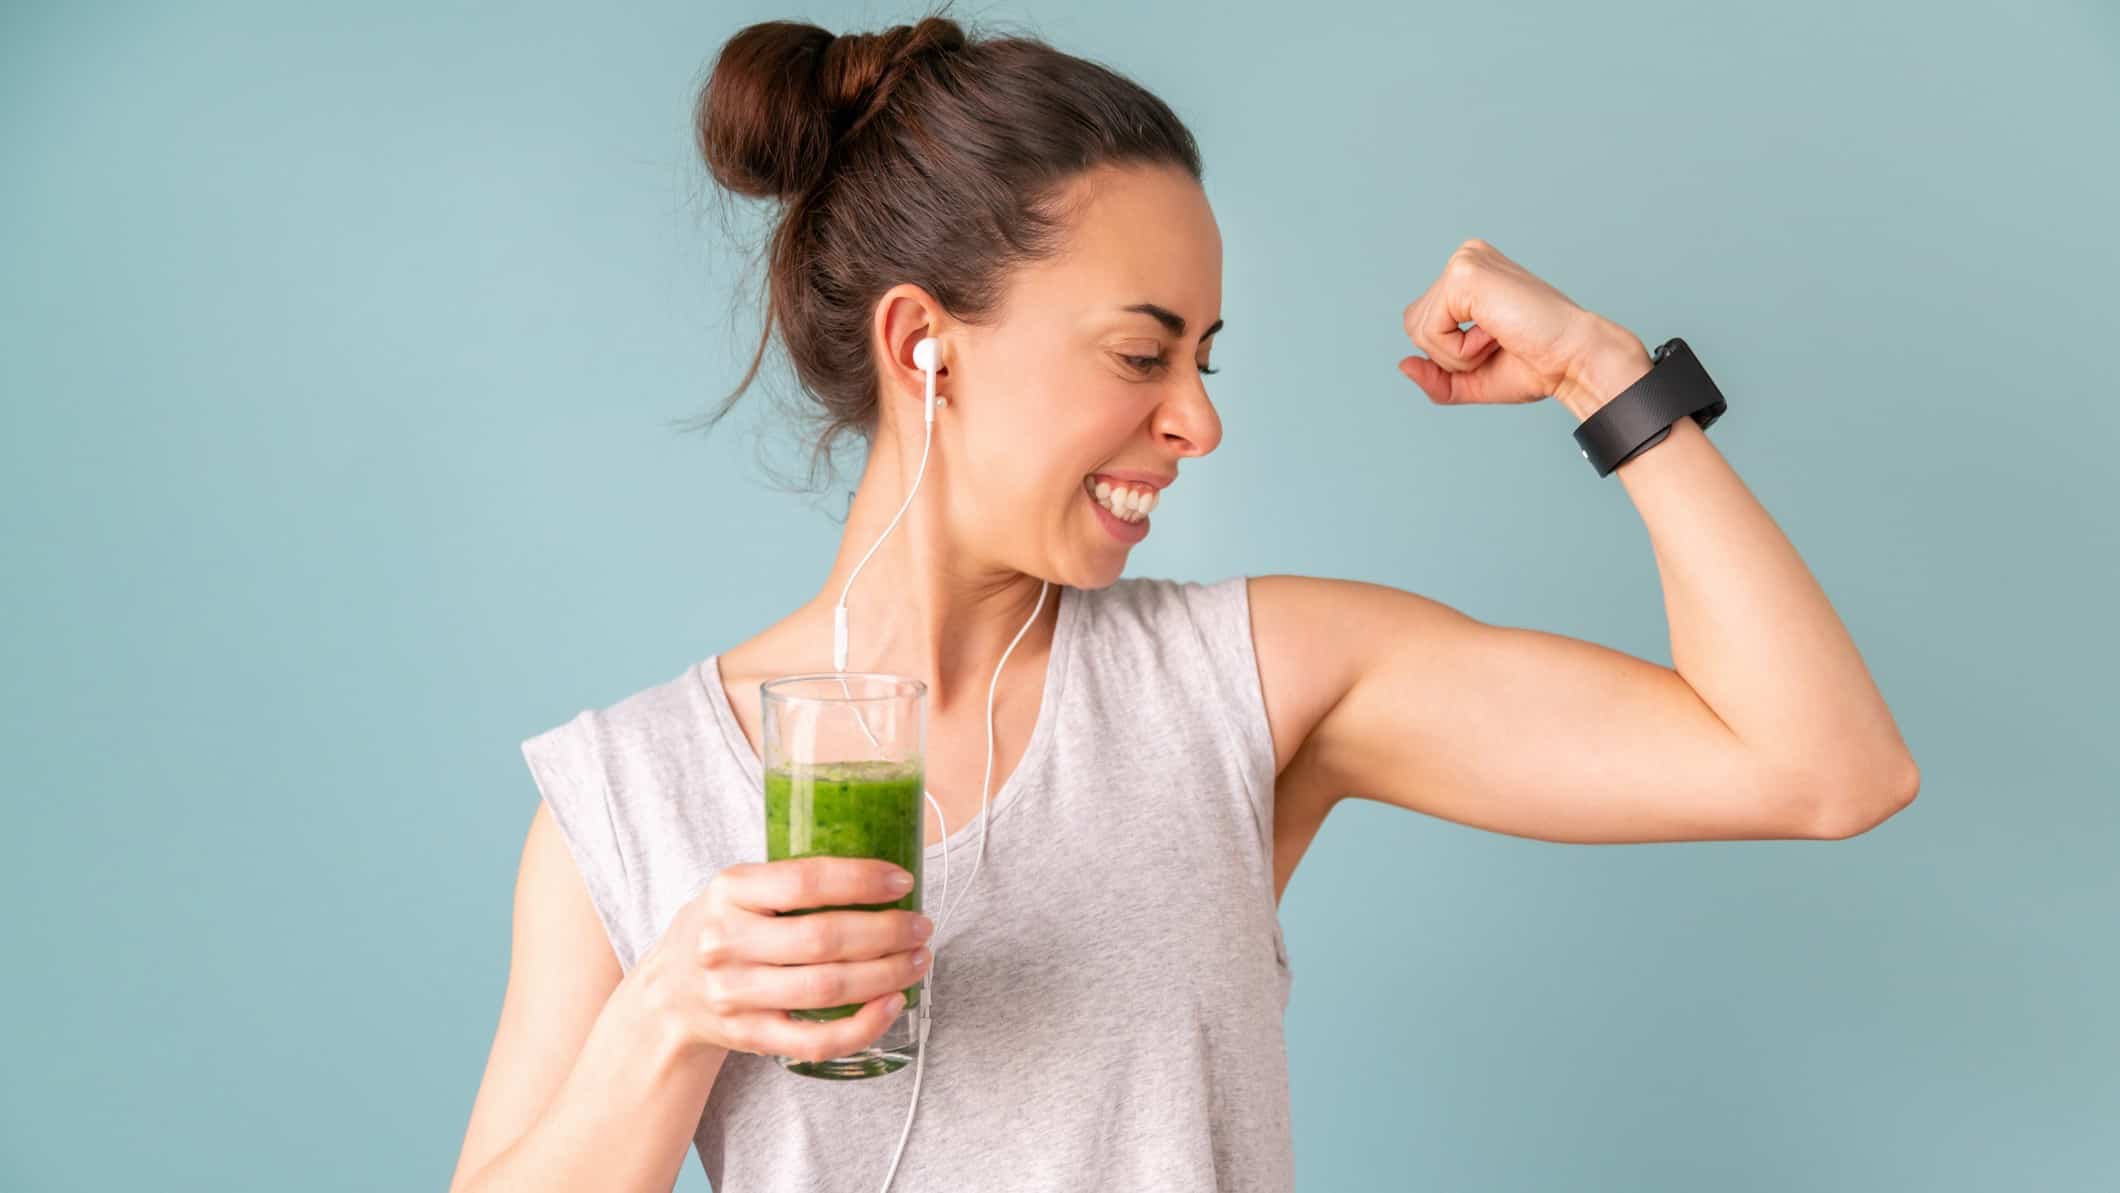 A woman in workout gear flexes her muscles while holding a juice